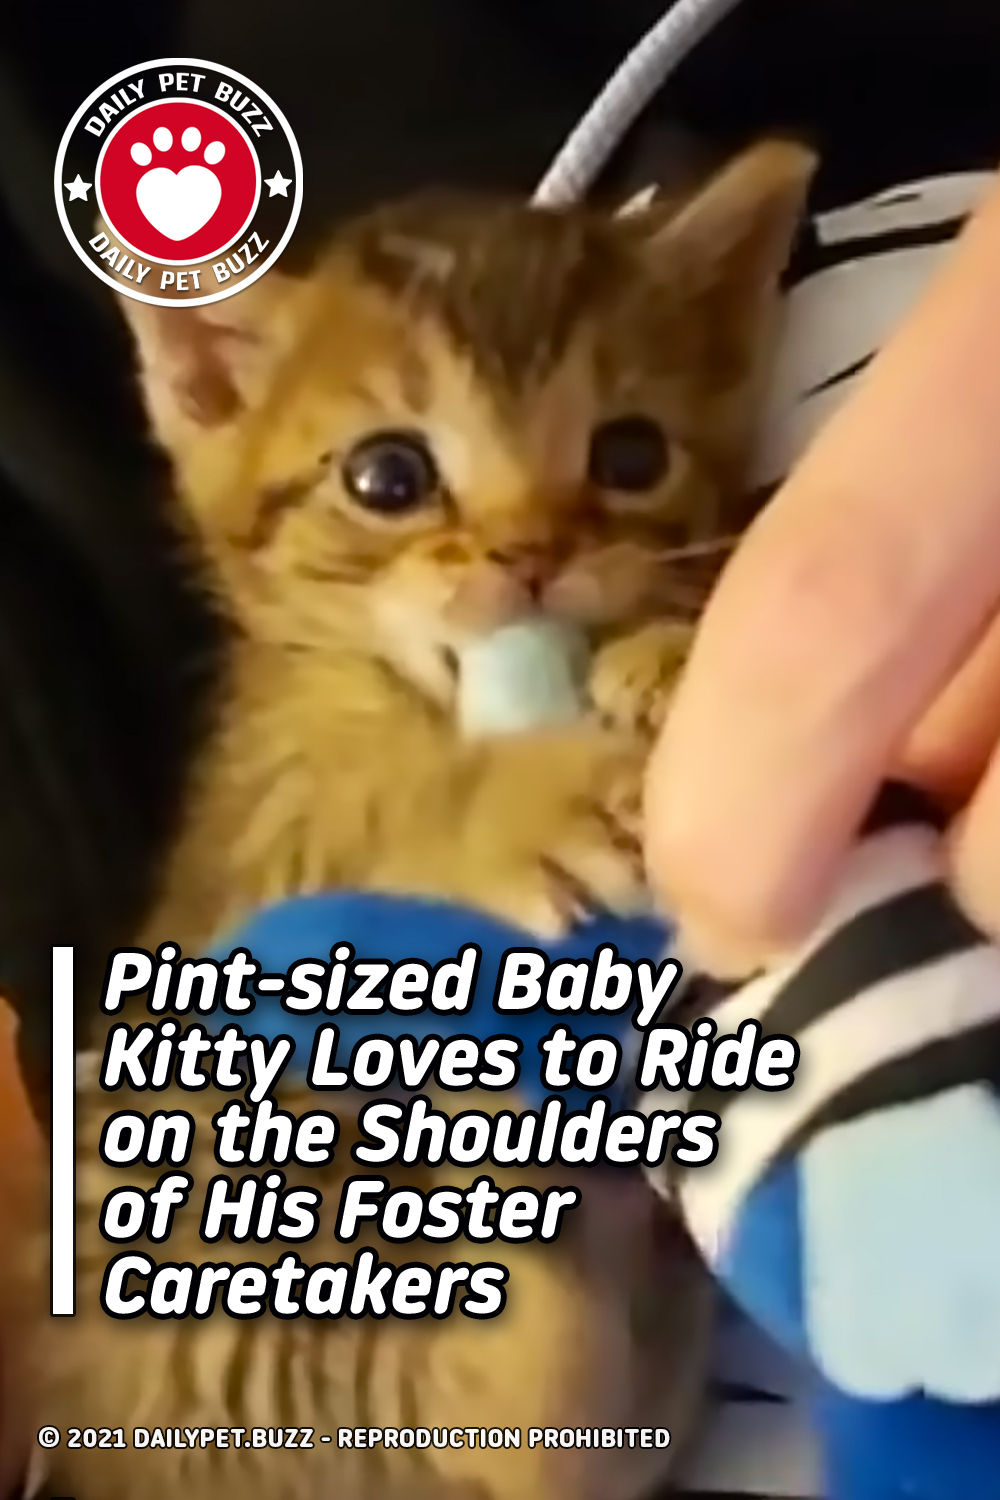 Pint-sized Baby Kitty Loves to Ride on the Shoulders of His Foster Caretakers